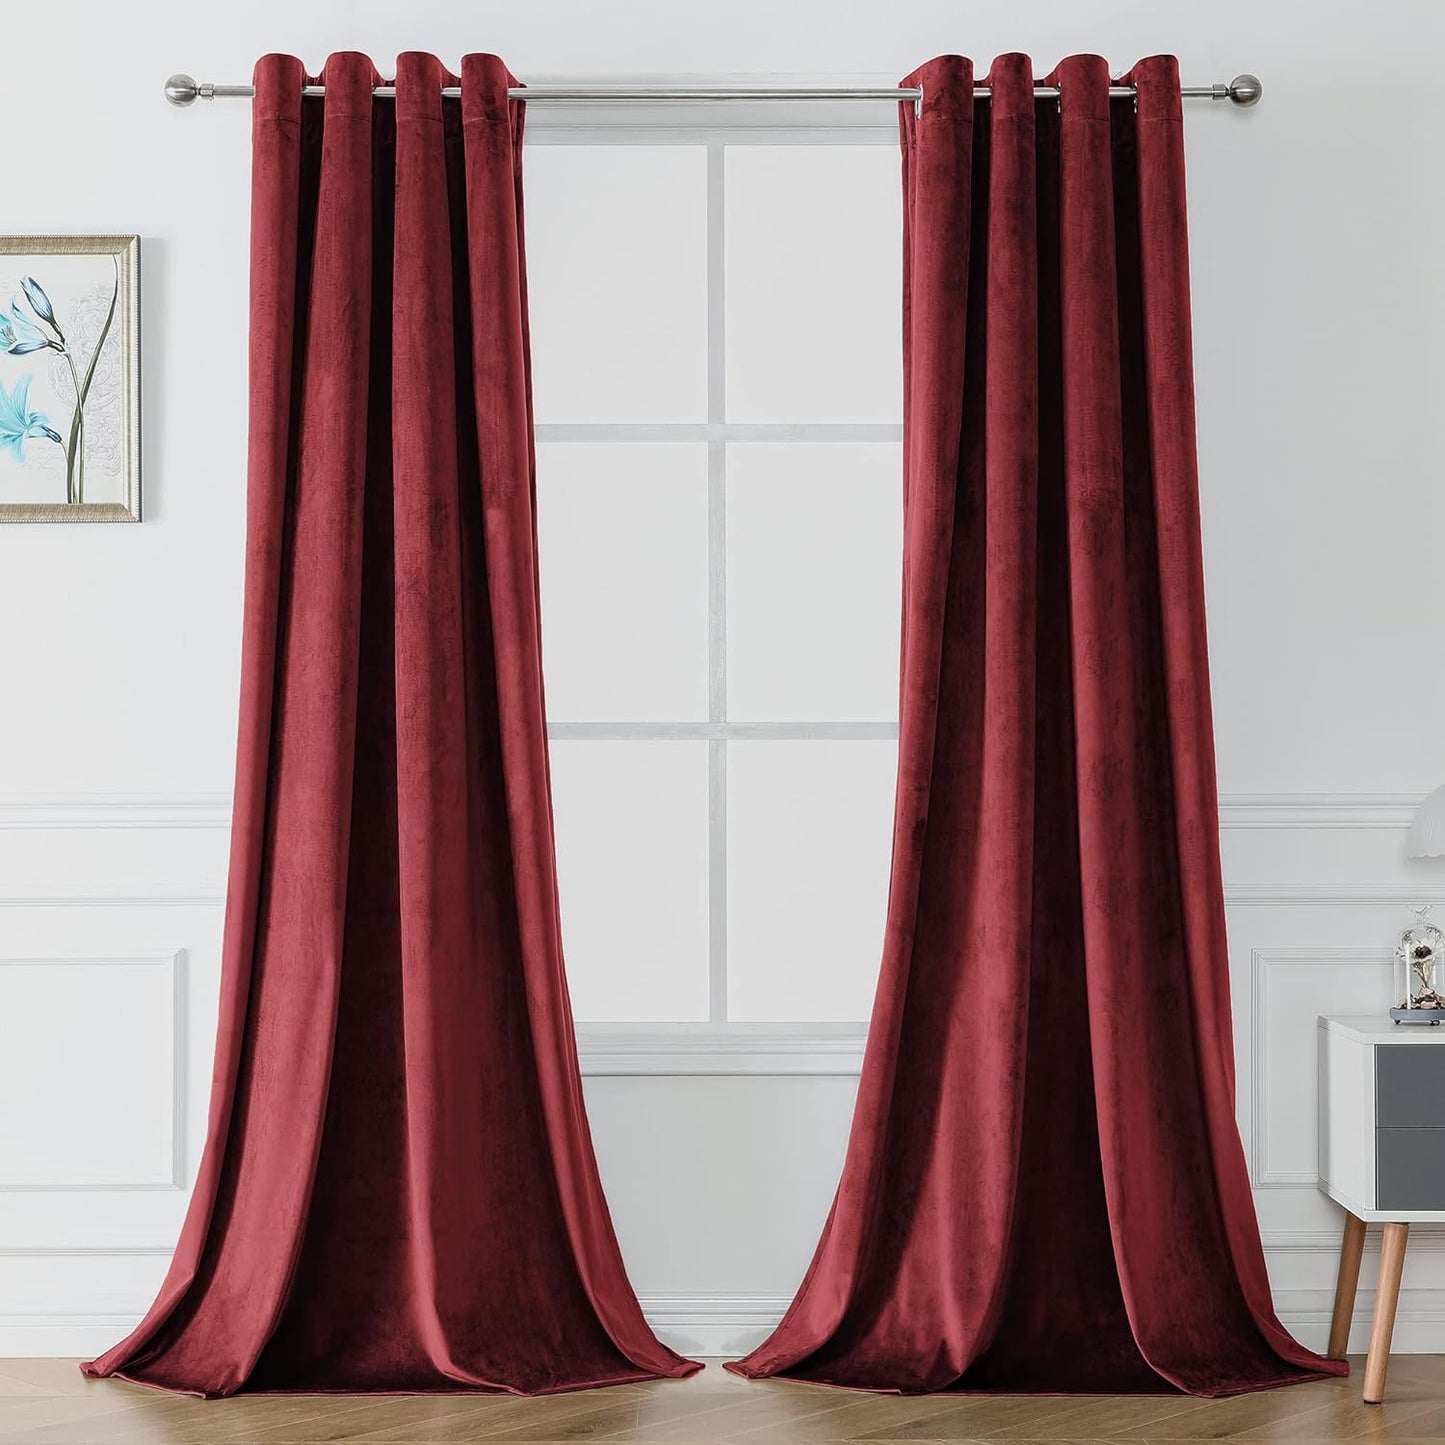 Victree Velvet Curtains for Bedroom, Blackout Curtains 52 X 84 Inch Length - Room Darkening Sun Light Blocking Grommet Window Drapes for Living Room, 2 Panels, Navy  Victree Burgundy 52 X 108 Inches 